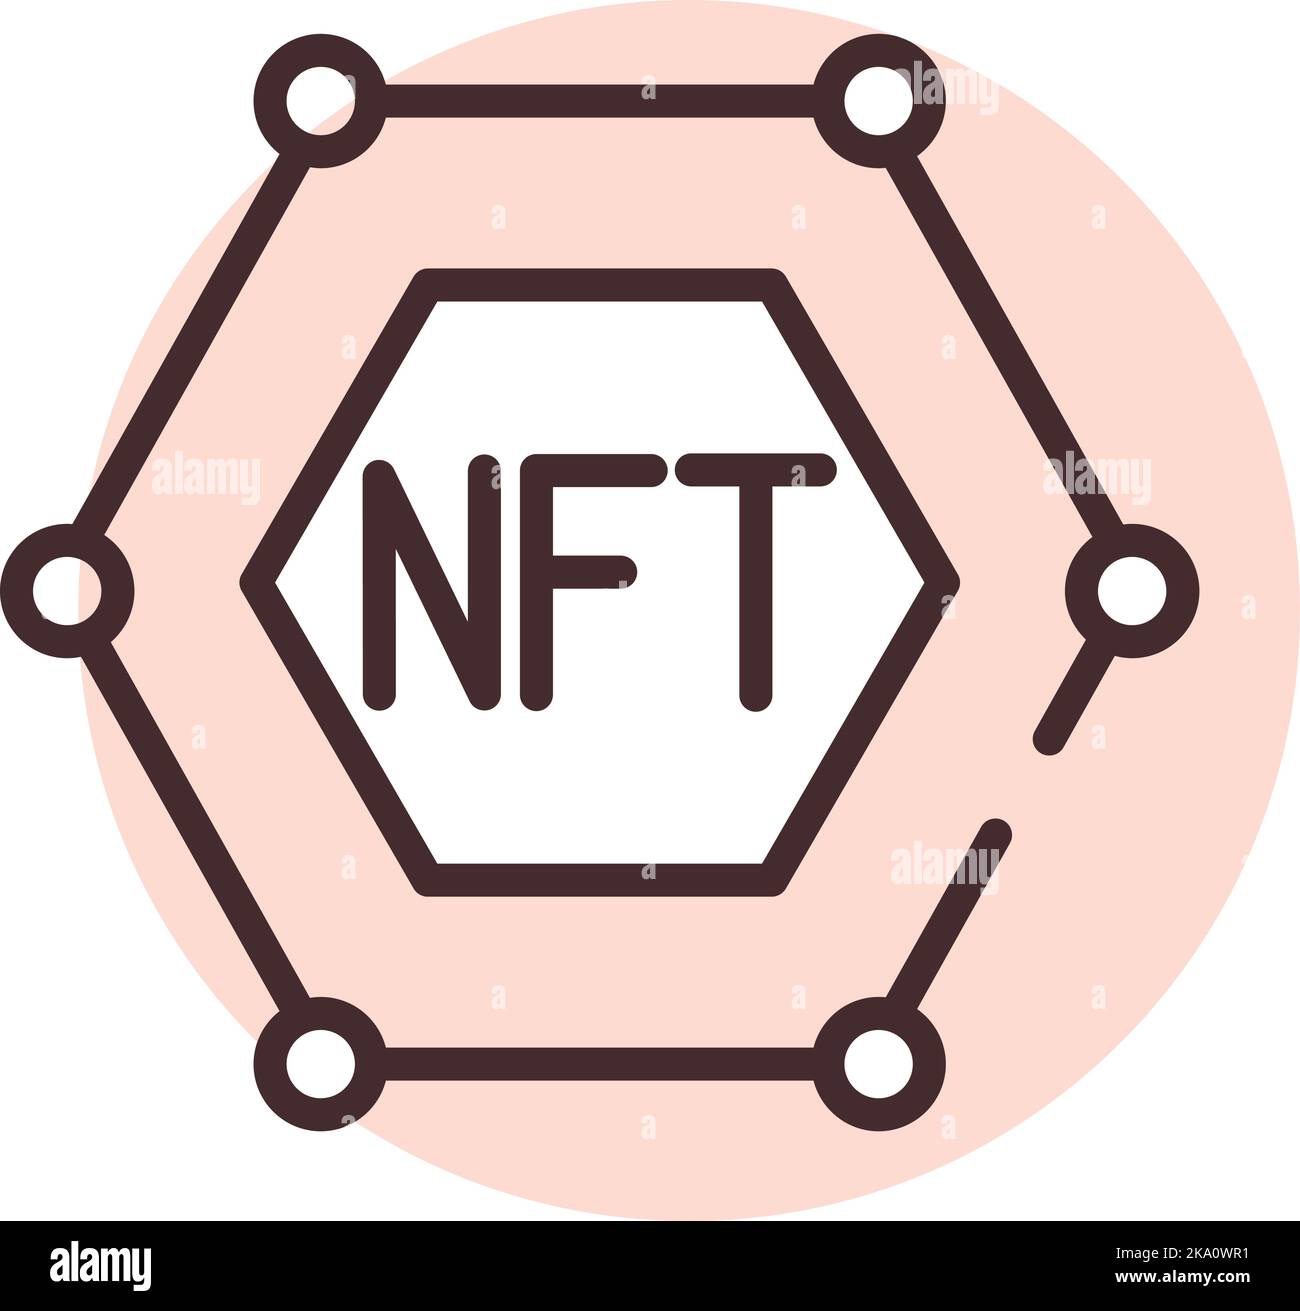 Blockchain chain NFT, illustration or icon, vector on white background. Stock Vector